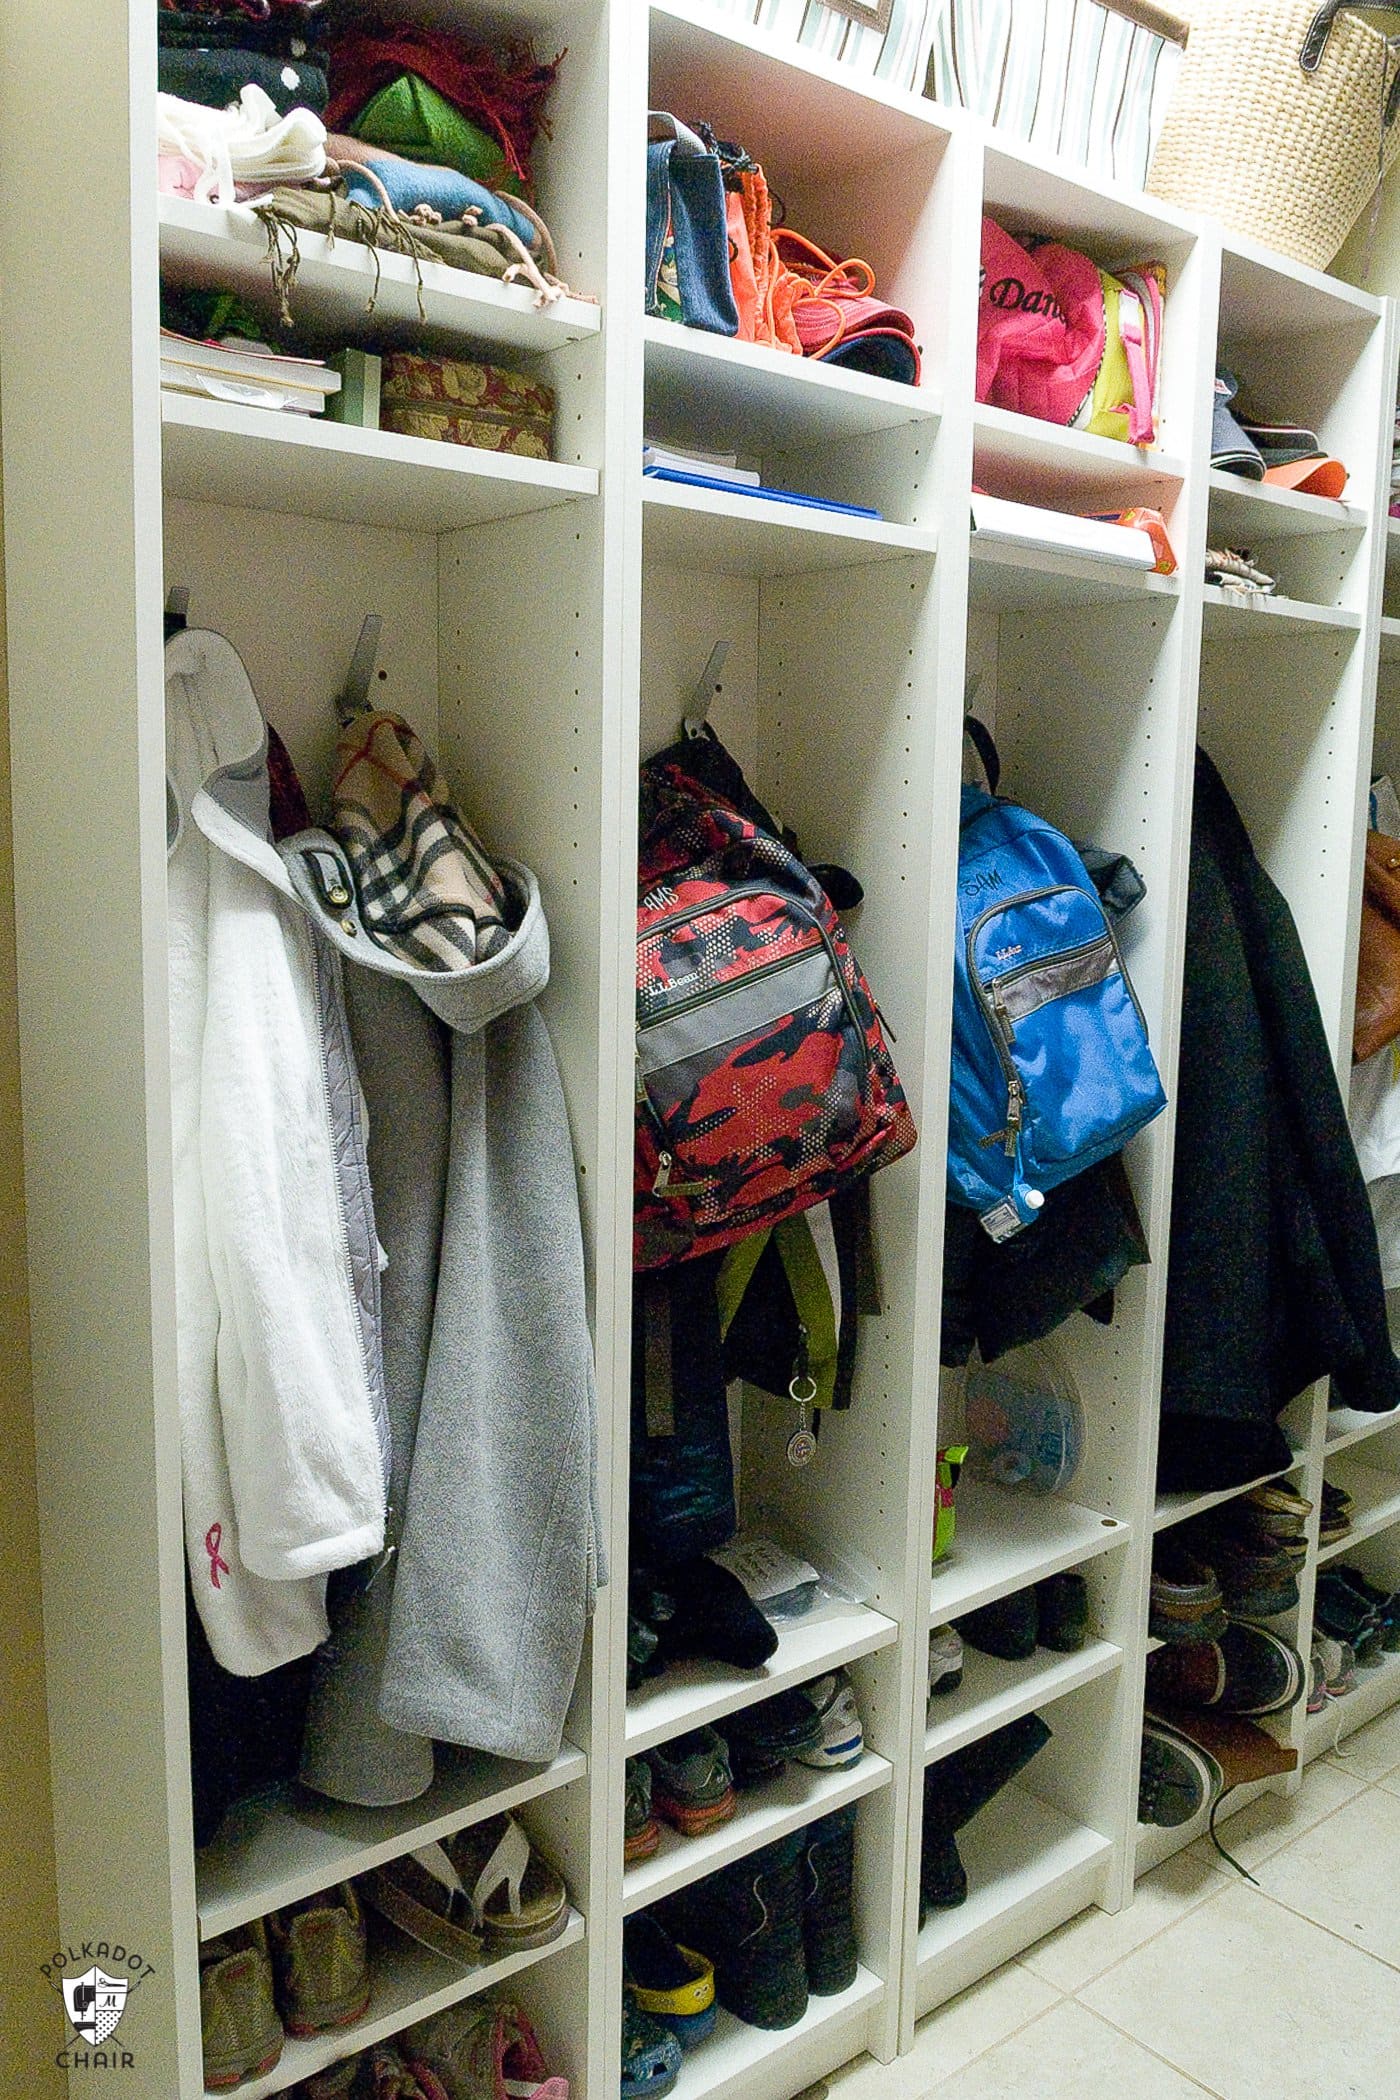 Ikea Hack Diy Mudroom Lockers From Ikea Bookcases The